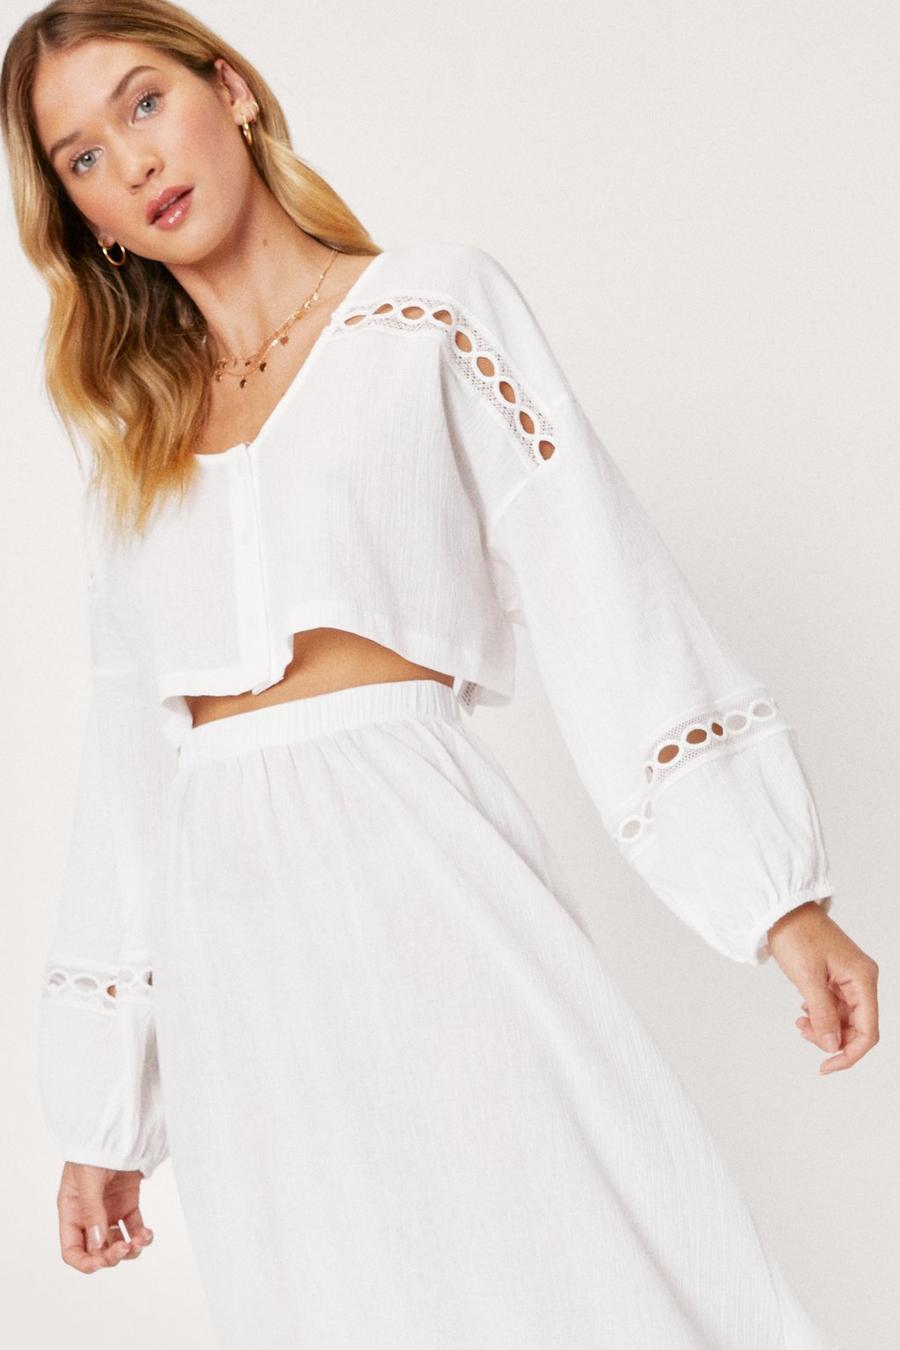 Cream white Crinkle Lace Insert Beach Cover Up Shirt